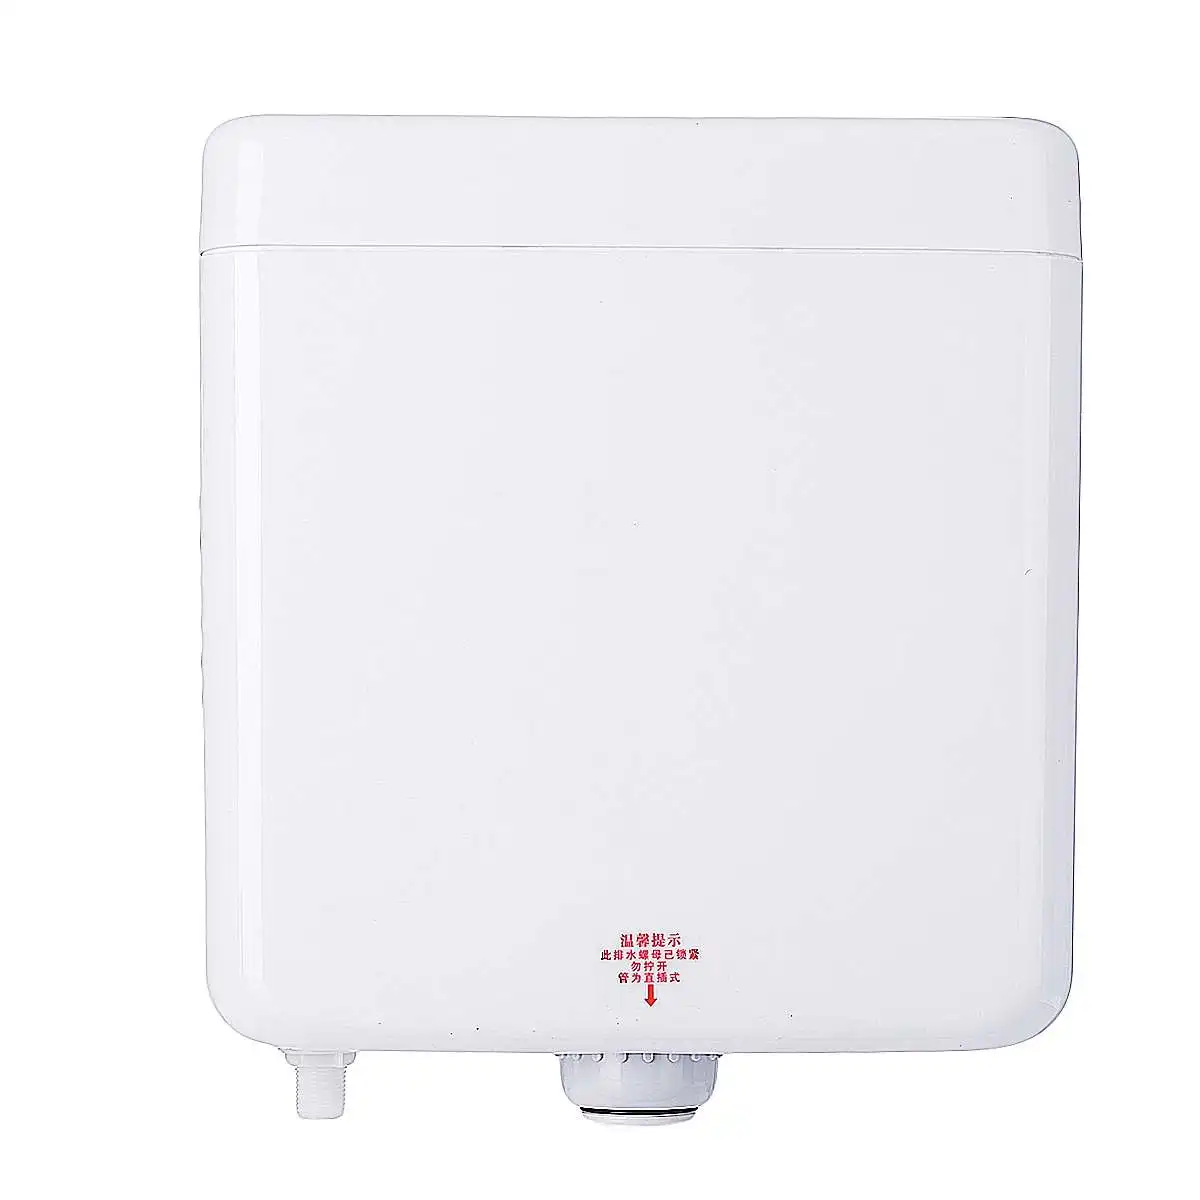 

Hot Plastic Back To Wall Manual Concealed Toilet Cistern Water Tank Dual Flush Hotel Home Bathroom Fixture Water Tank Toilet Par